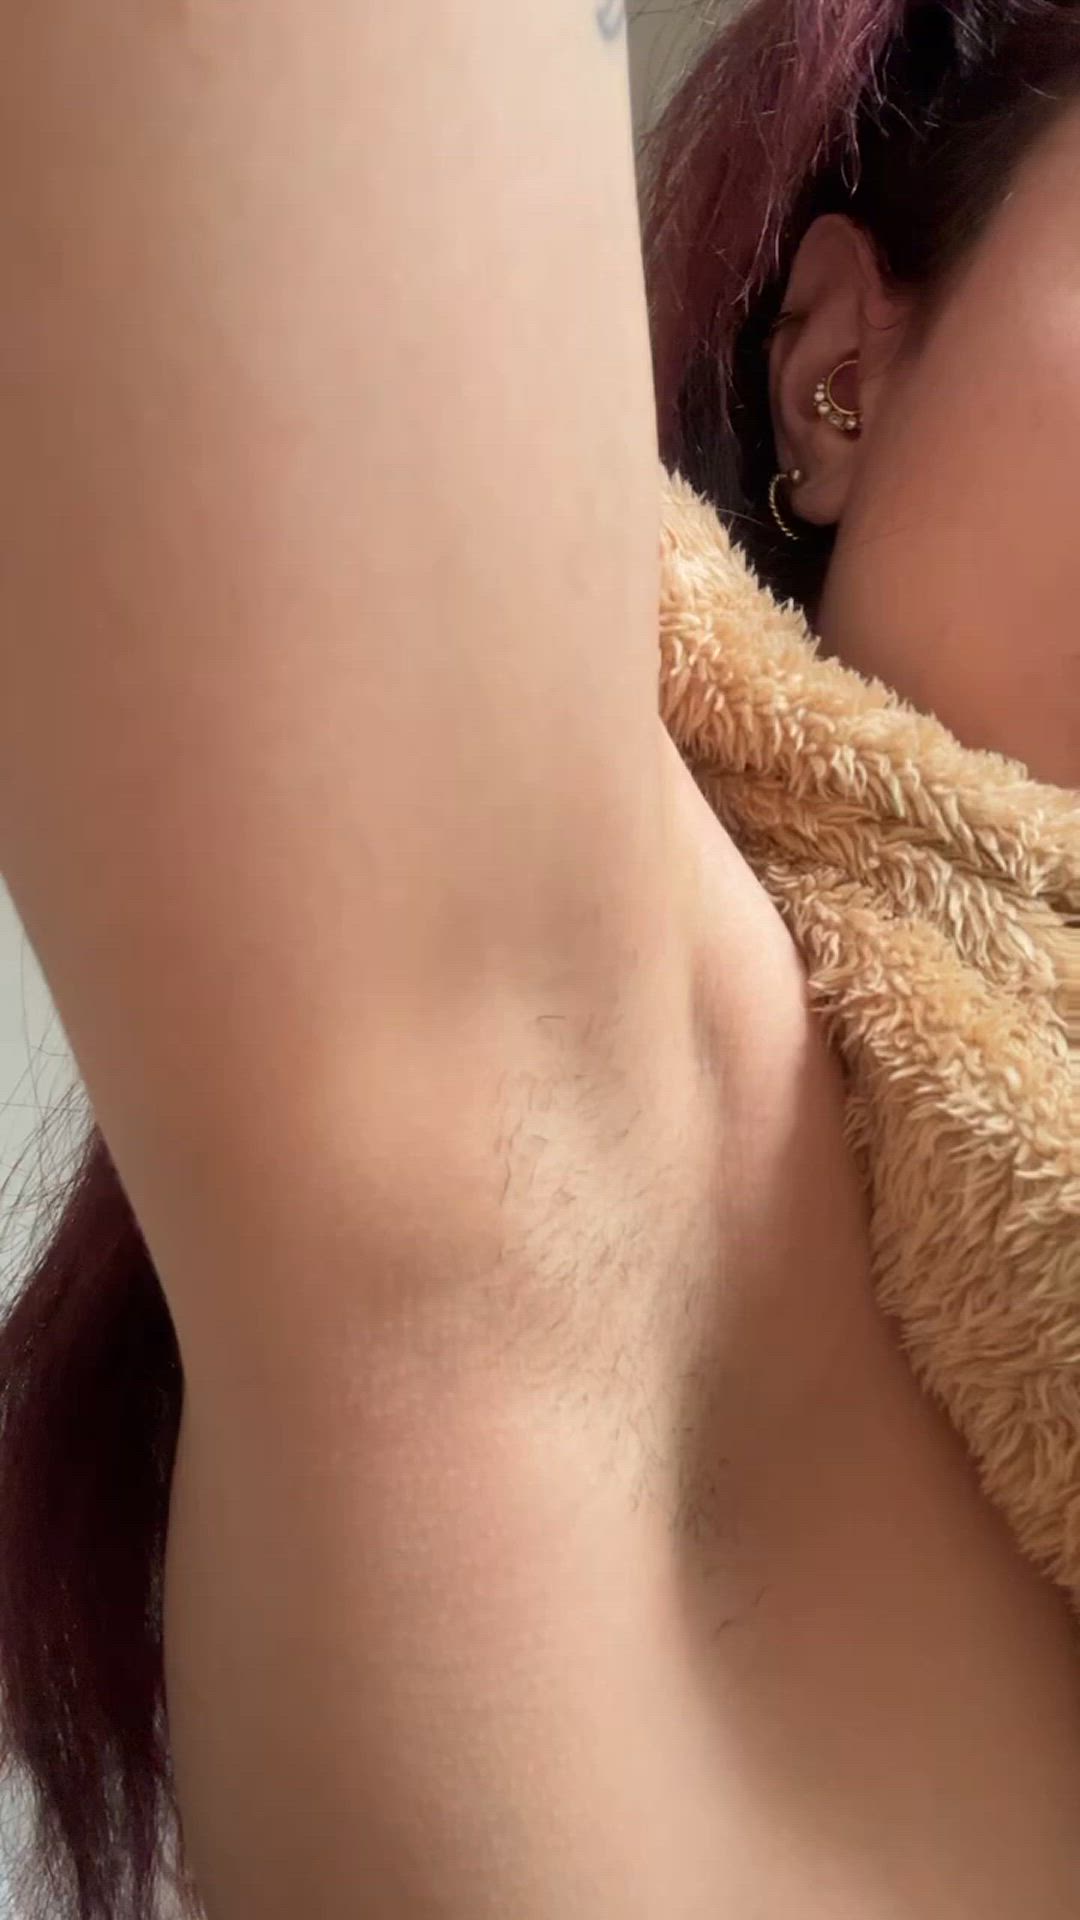 Armpits porn video with onlyfans model Anastasia.yourbaby <strong>@anastasia.yourbaby</strong>